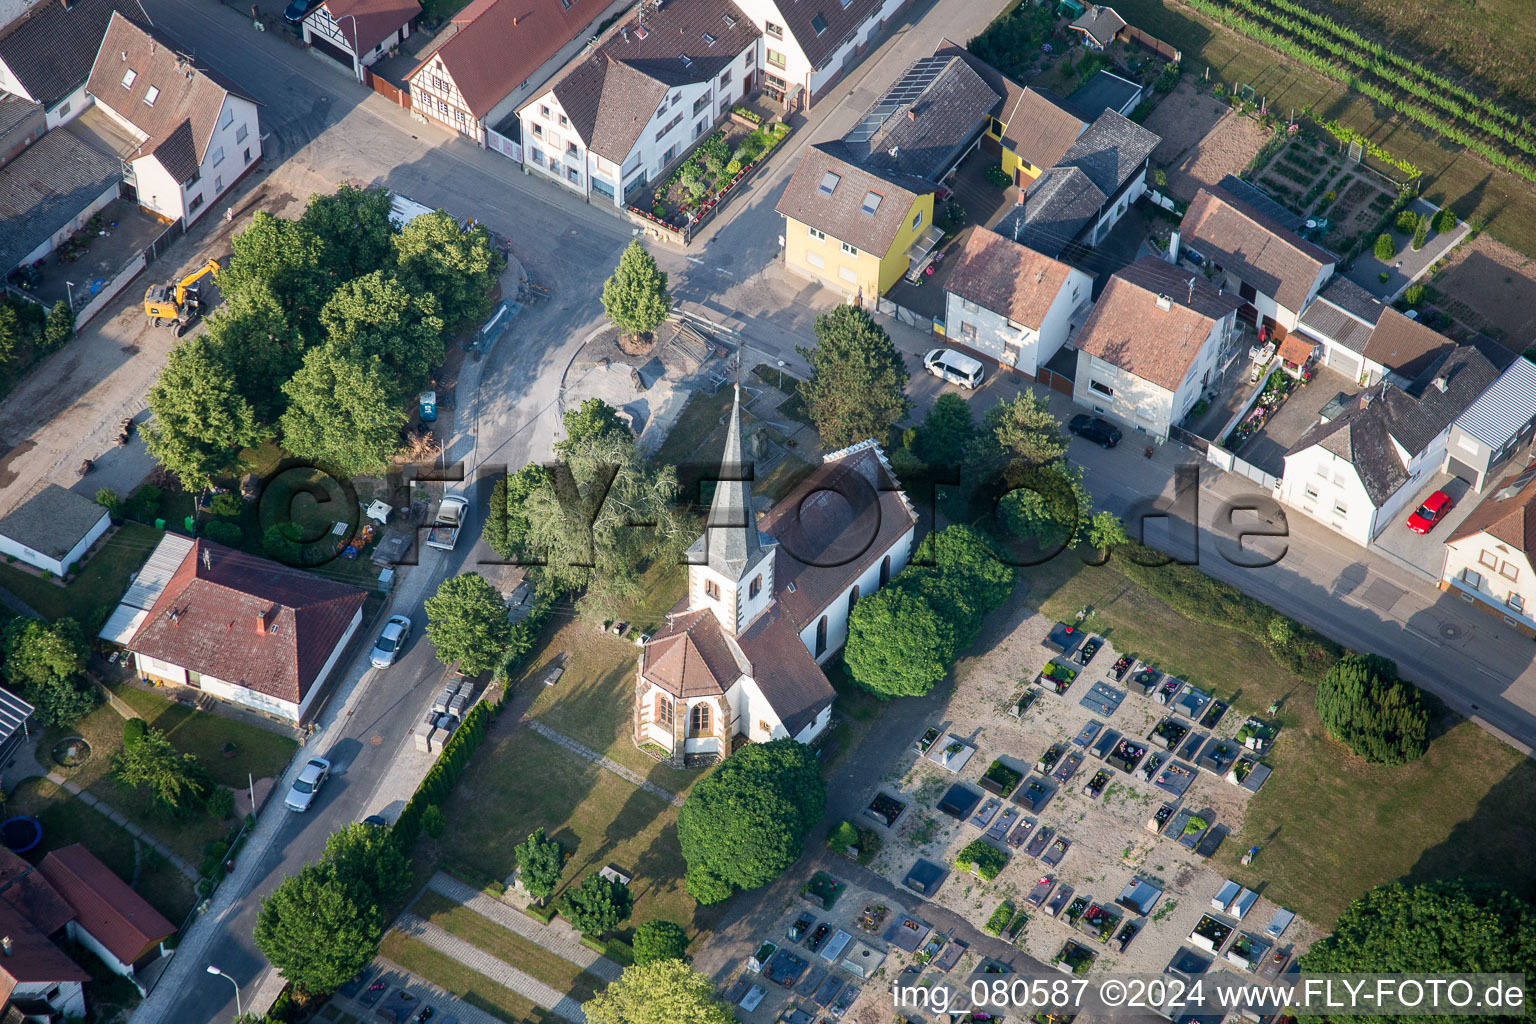 Aerial view of Church building in the village of in Lustadt in the state Rhineland-Palatinate, Germany